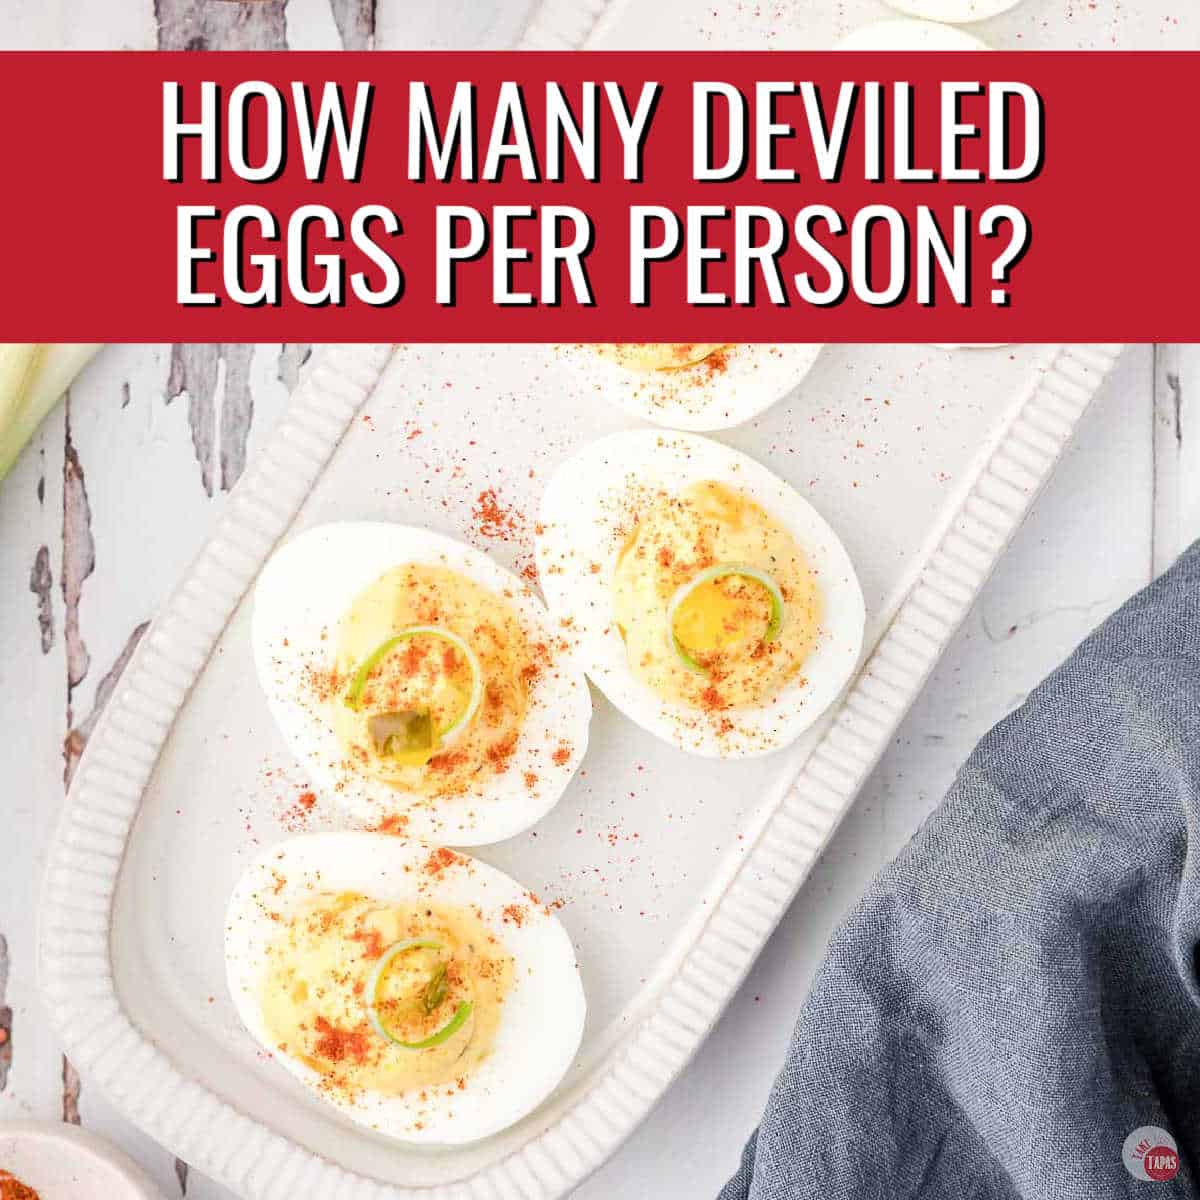 tray of deviled eggs with red banner and white text